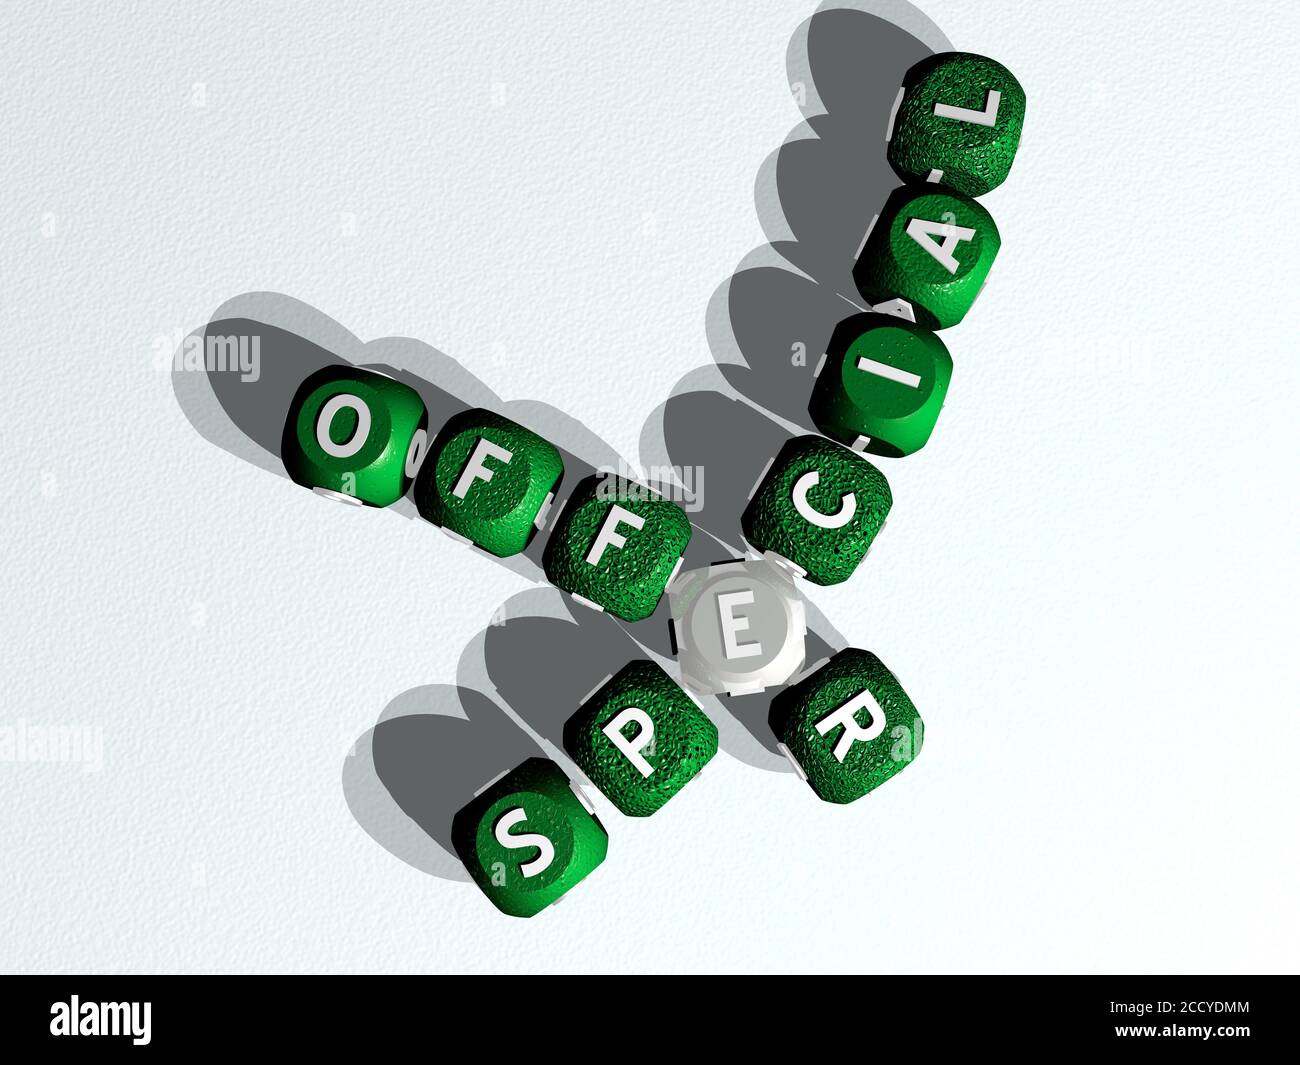 special offer crossword of curved text made of individual letters 3D